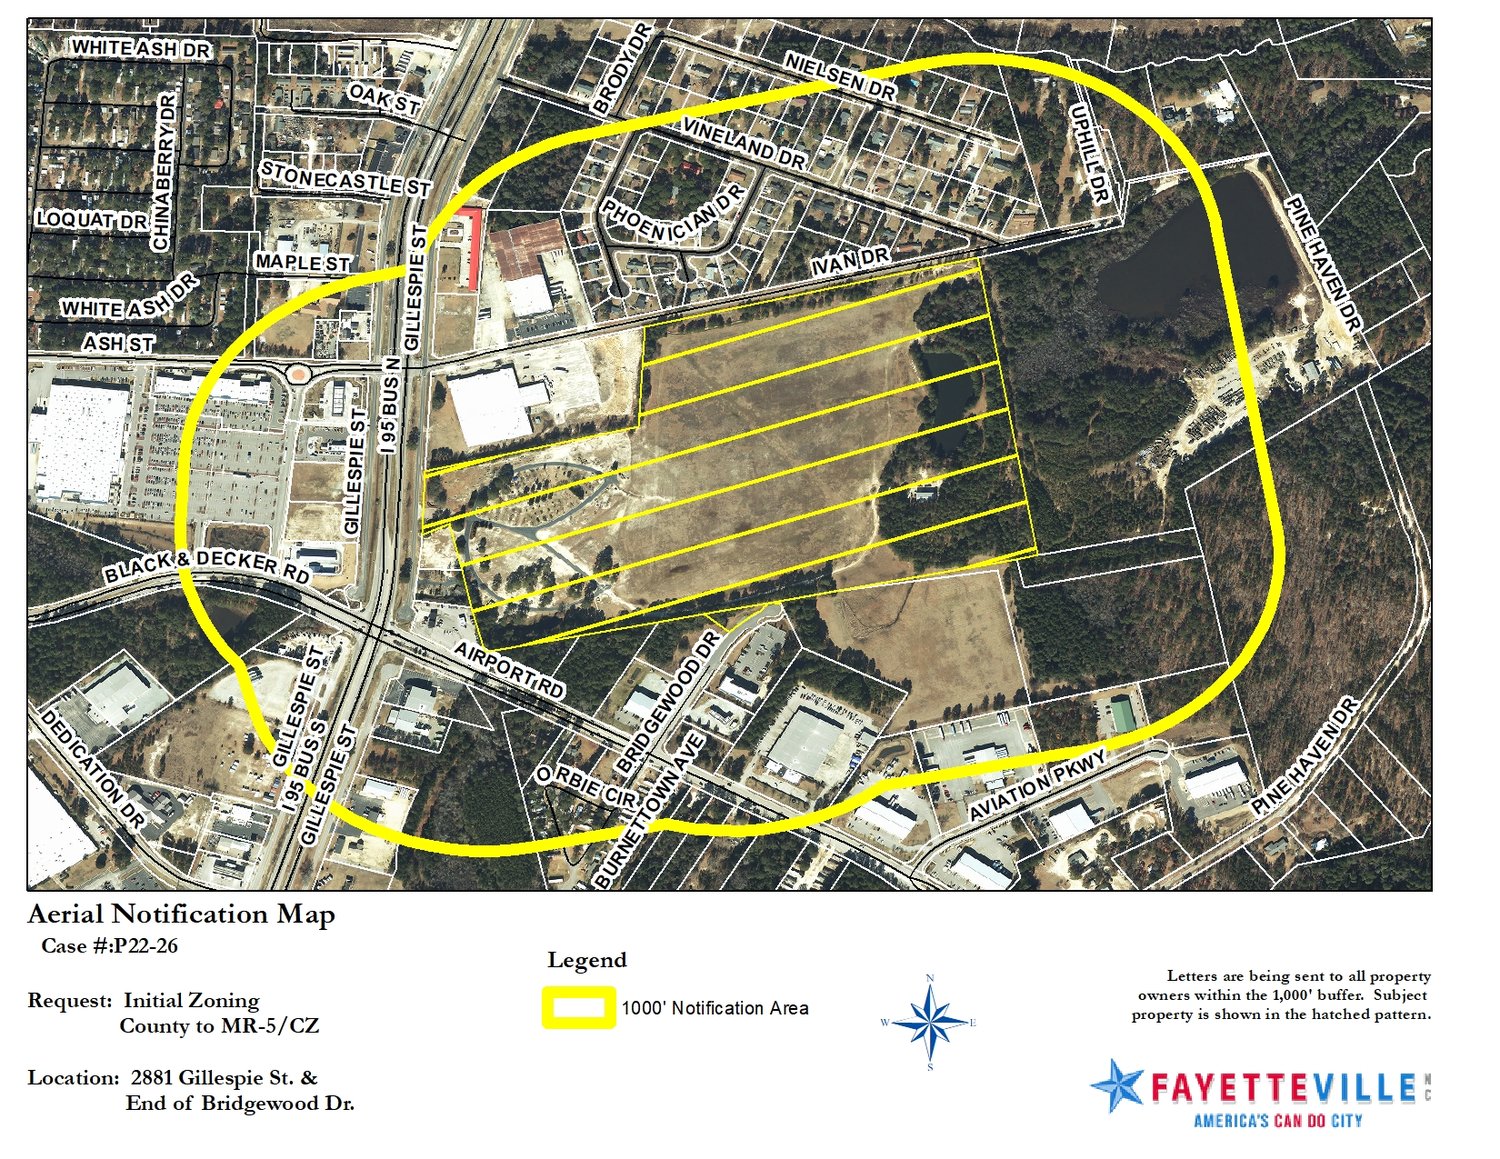 The Fayetteville City Council has narrowly rejected a plan for a 237-unit residential neighborhood on land beneath a primary flight pattern for Fayetteville Regional Airport.